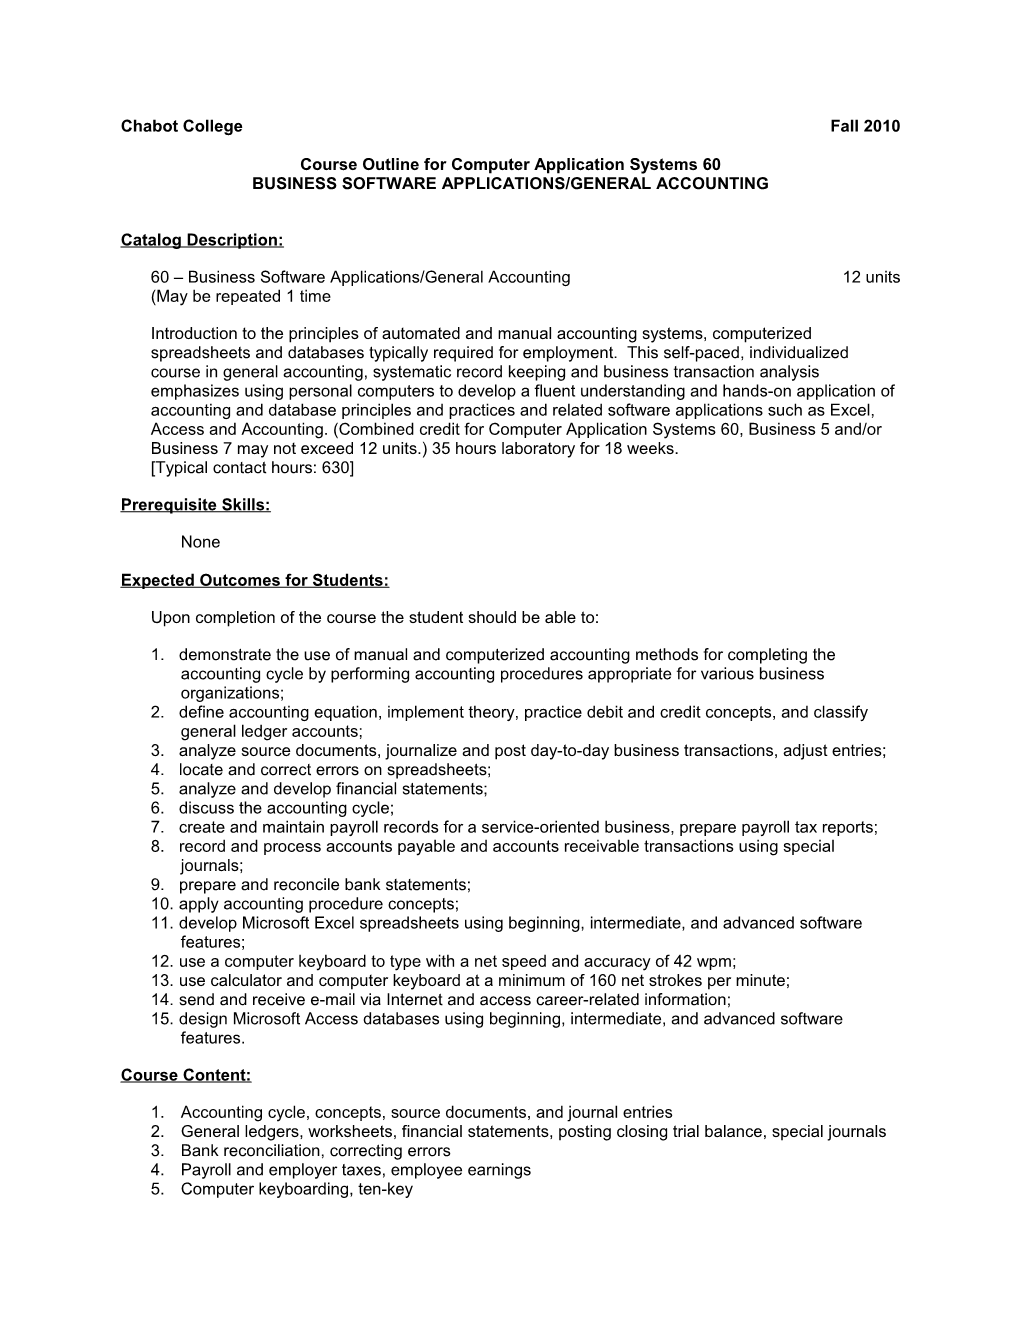 Course Outline for Computer Application Systems 60, Page 1